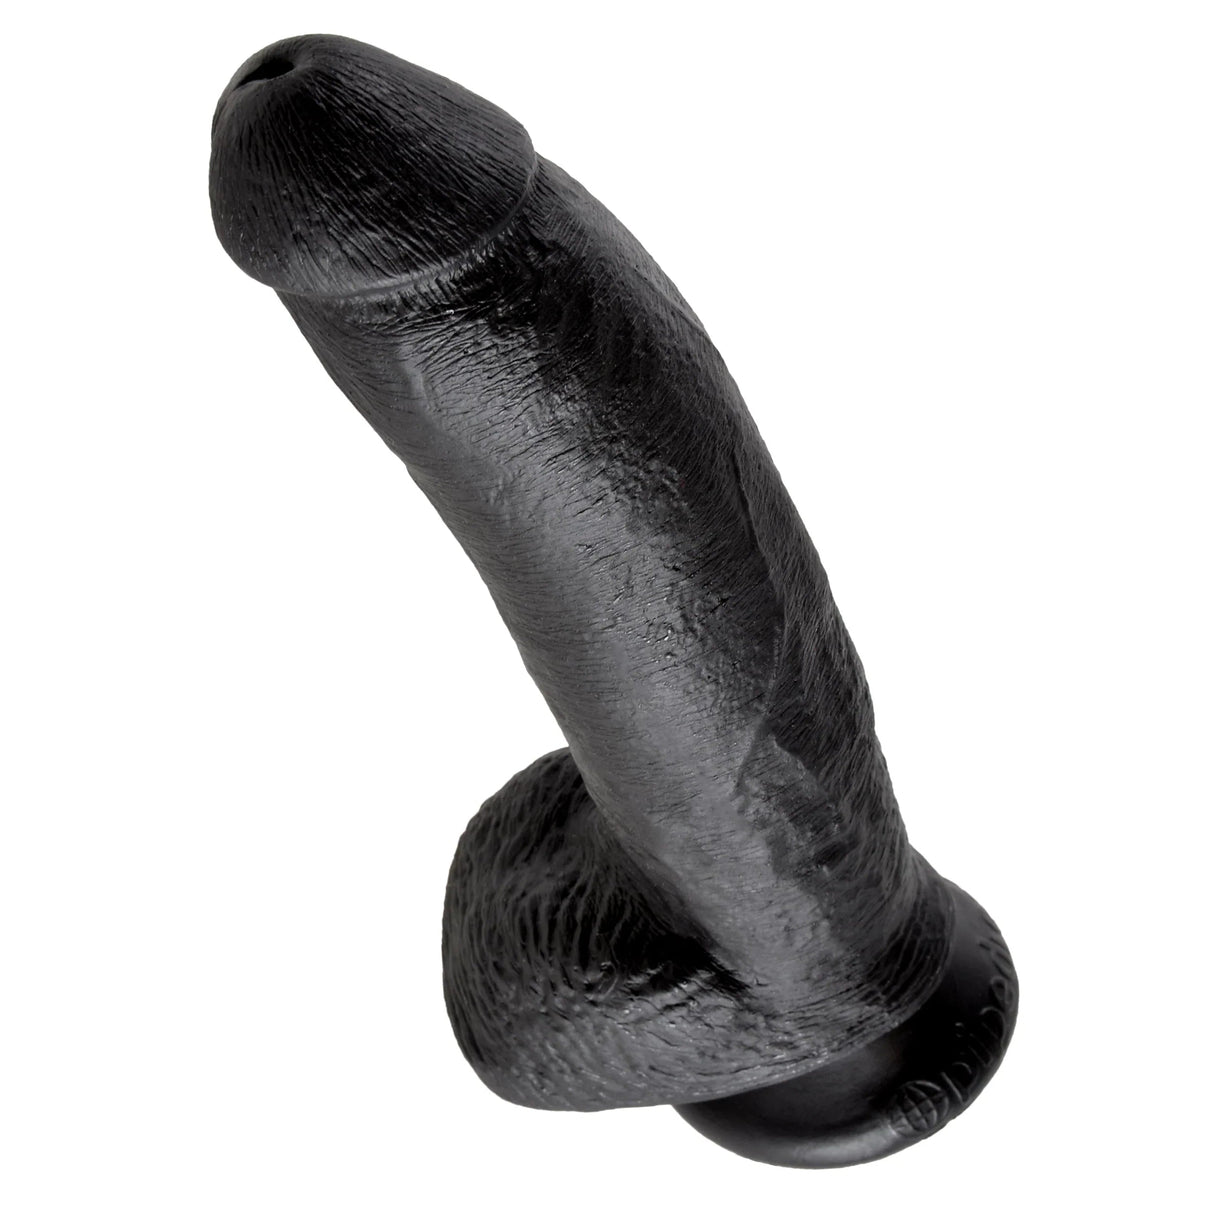 King Cock 9 Inch Dildo with Balls